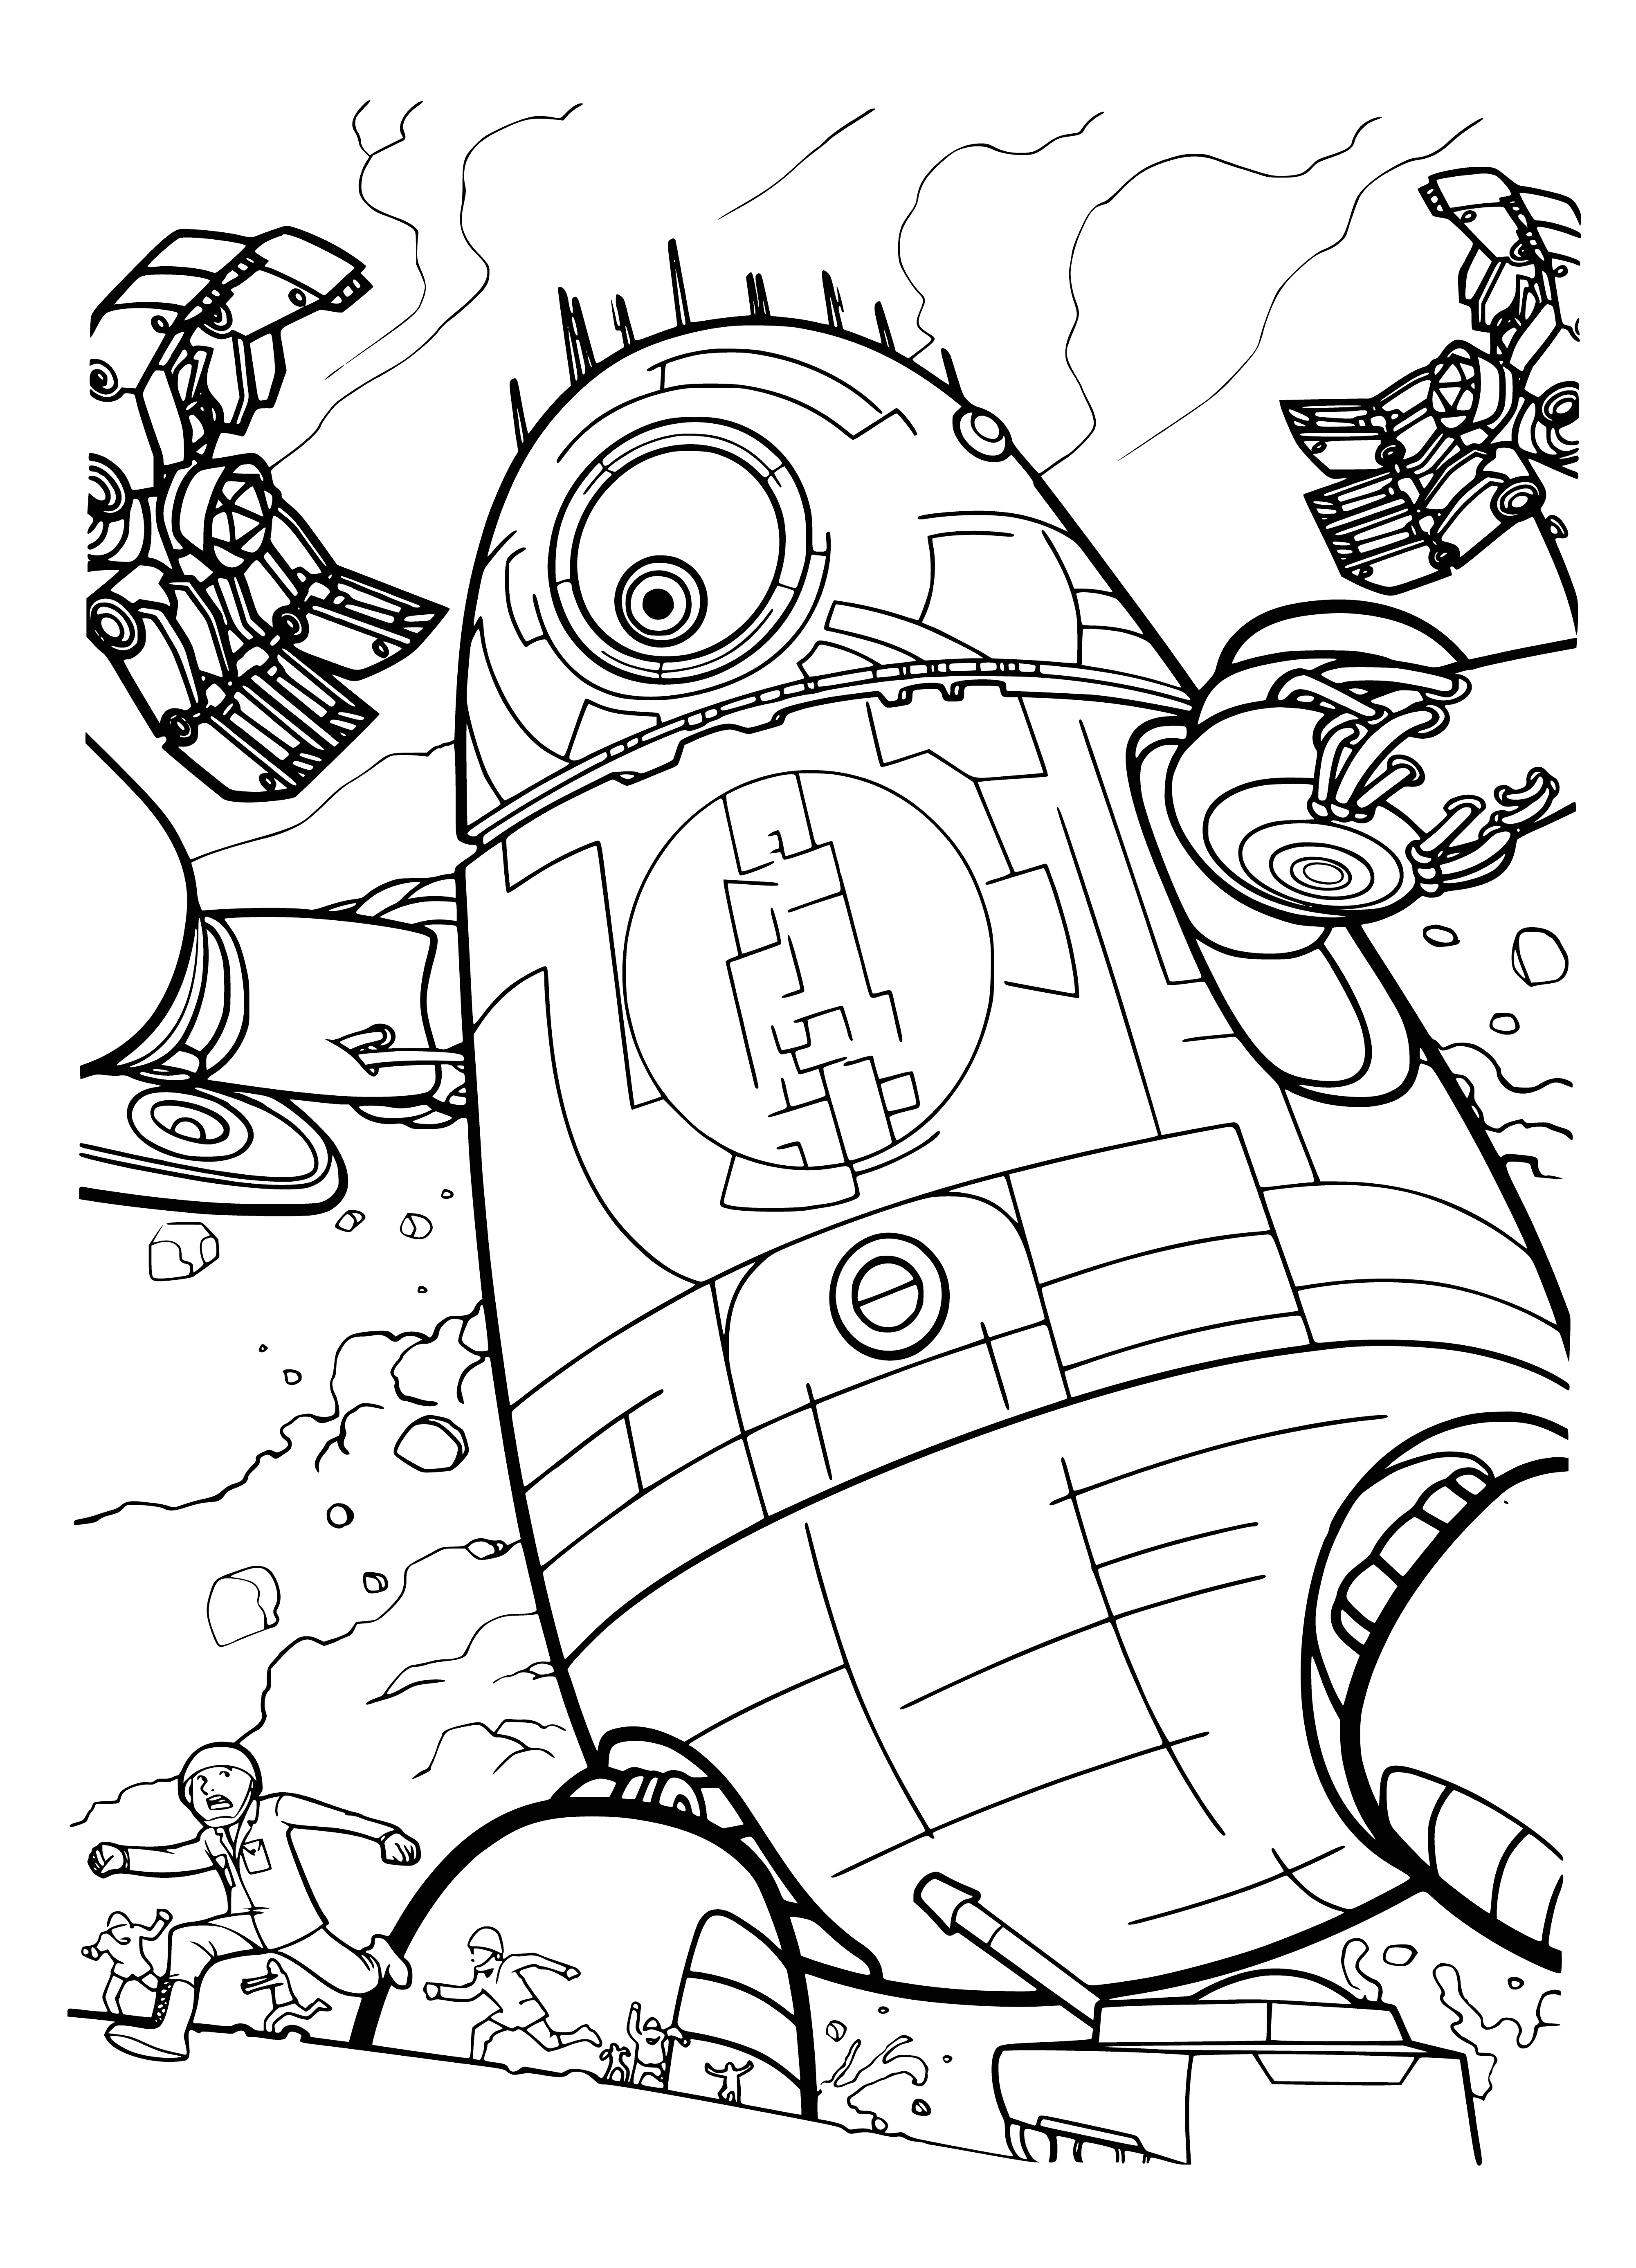 Huge robot coloring page